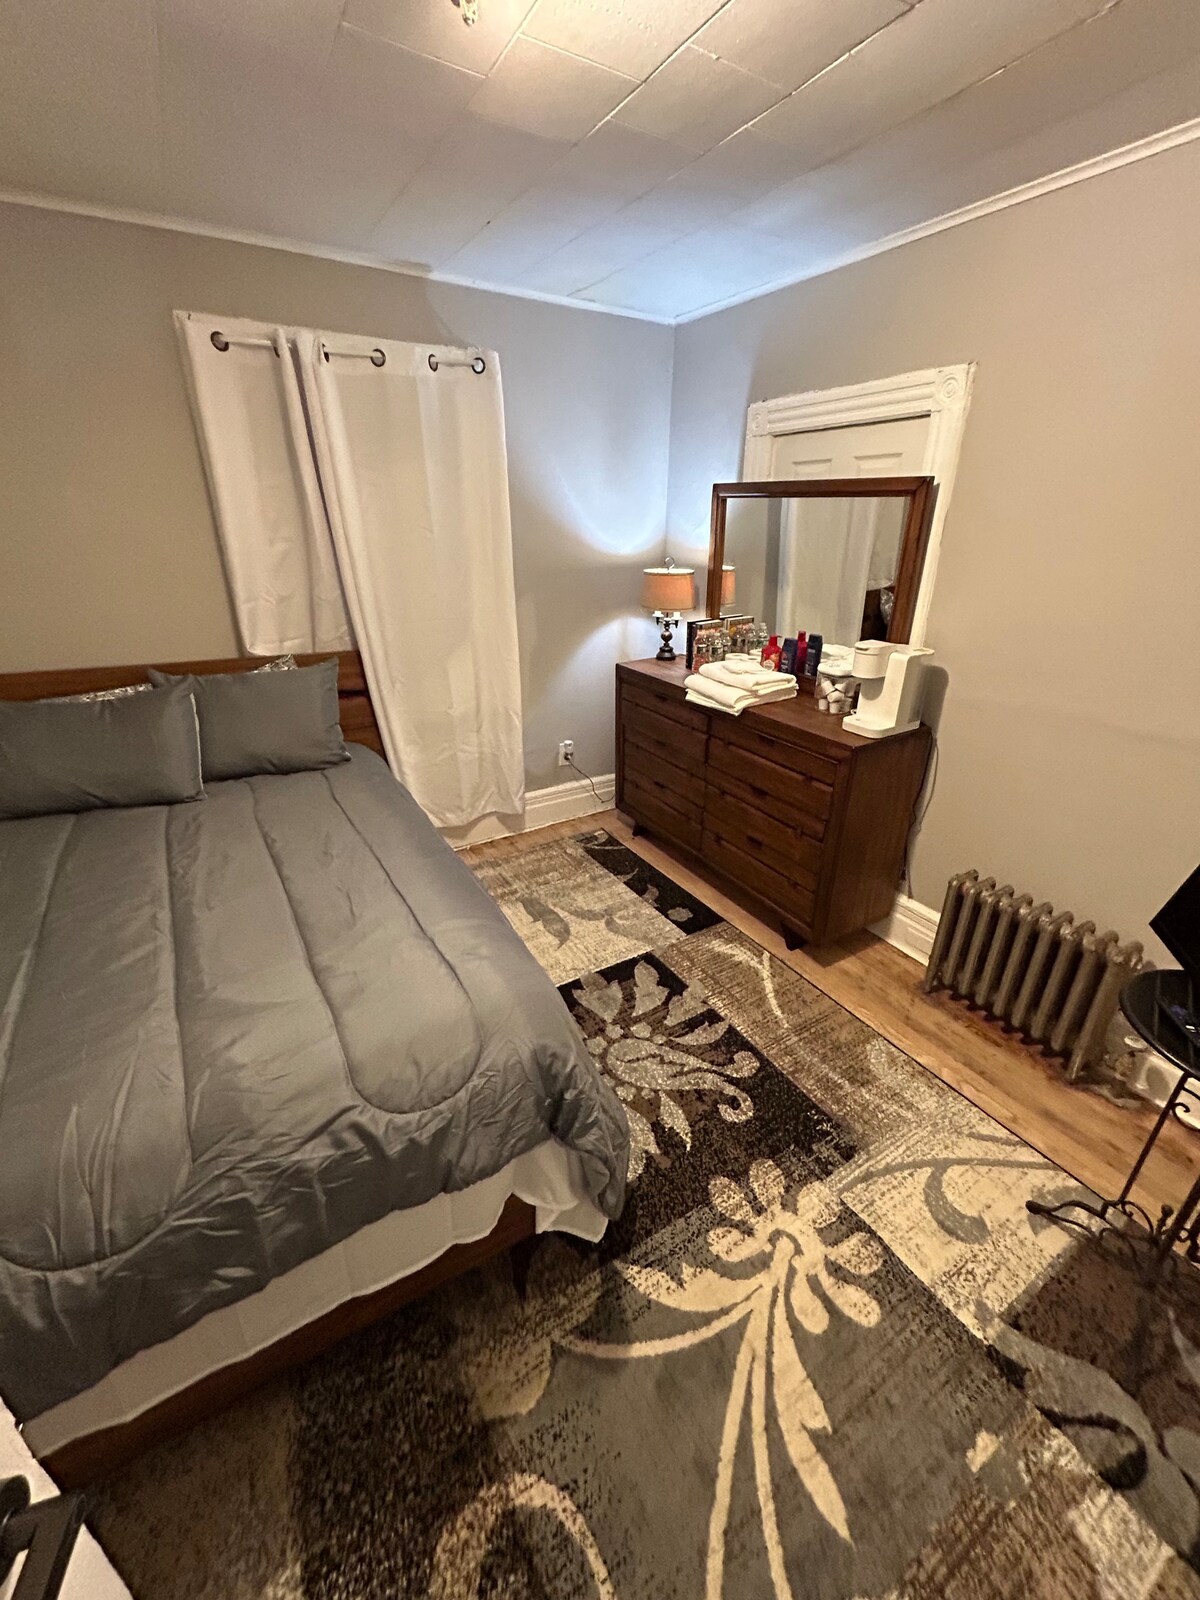 Private Room in the Heart of Passaic